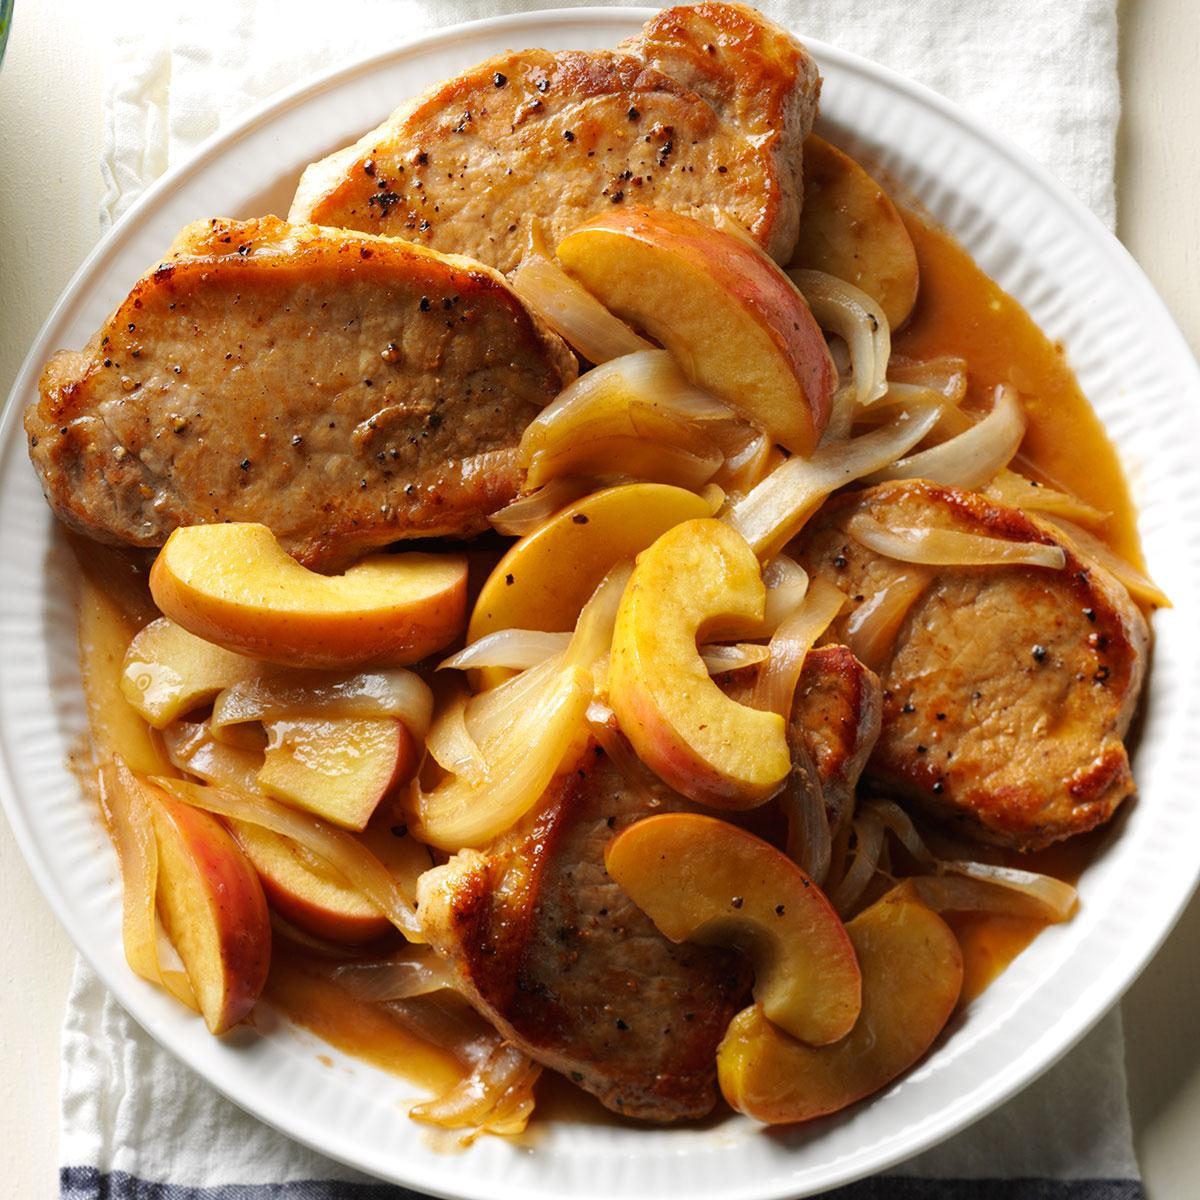 Day 27: Skillet Pork Chops with Apples & Onions